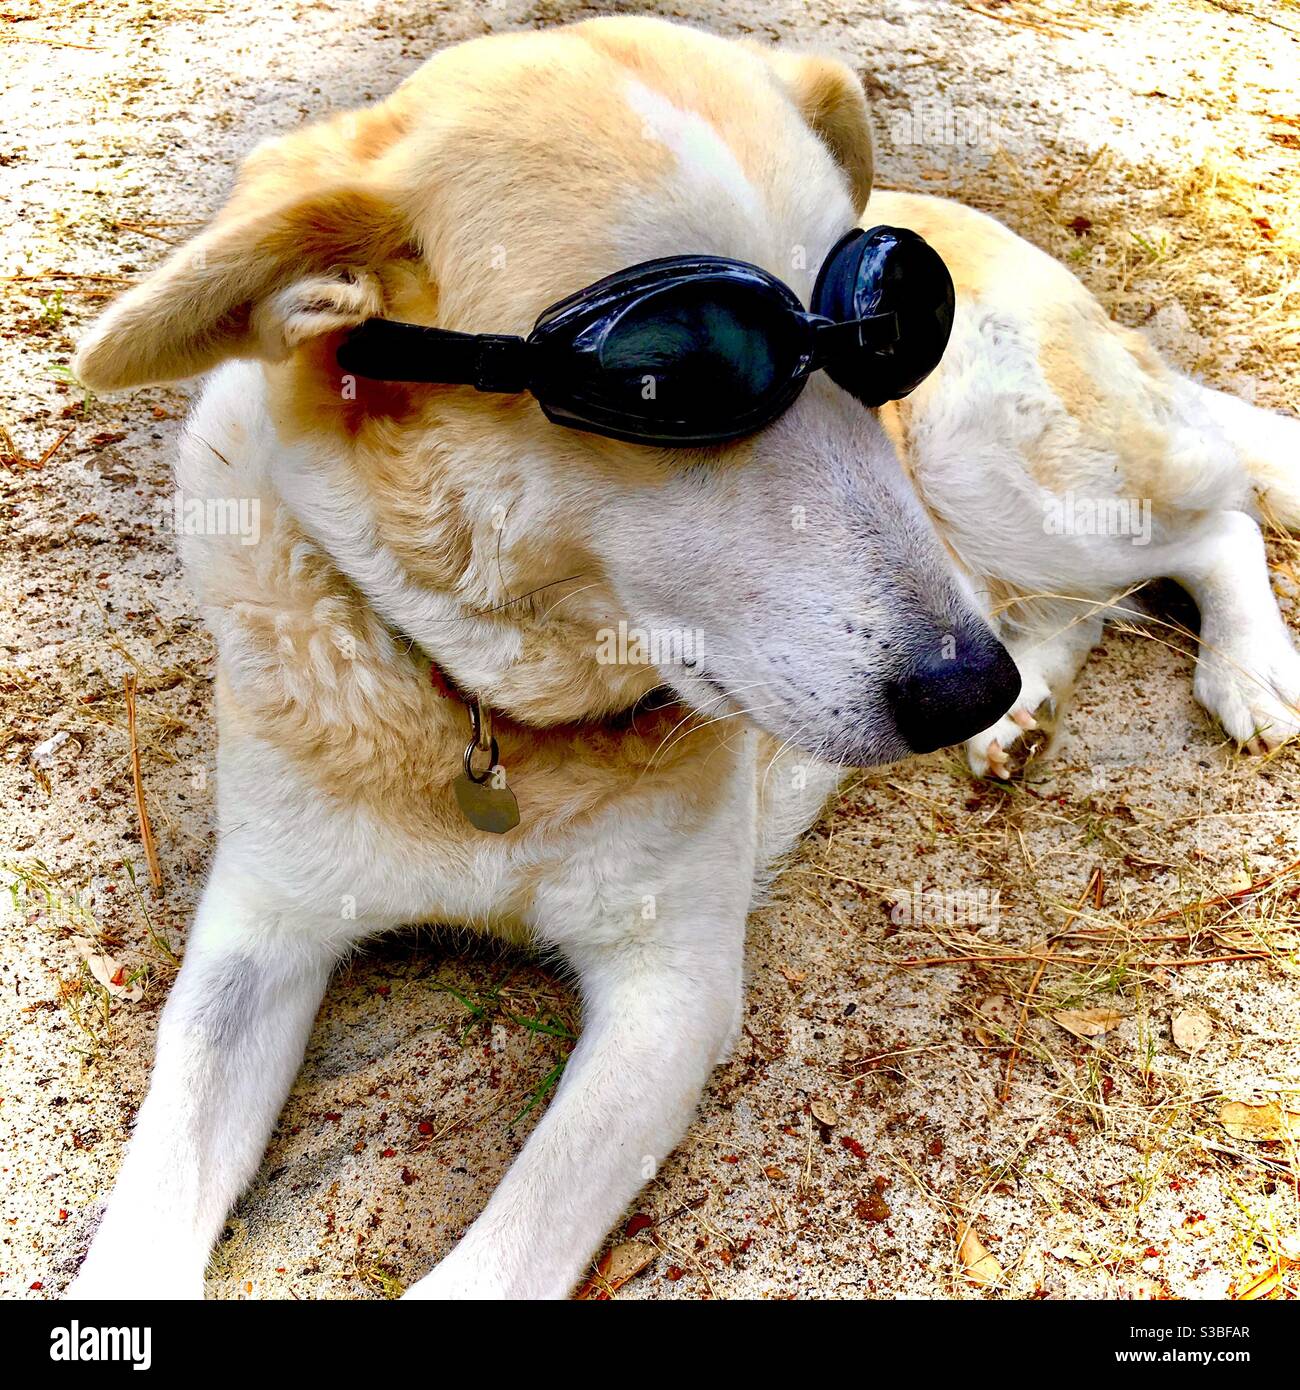 A dog wearing goggles Stock Photo